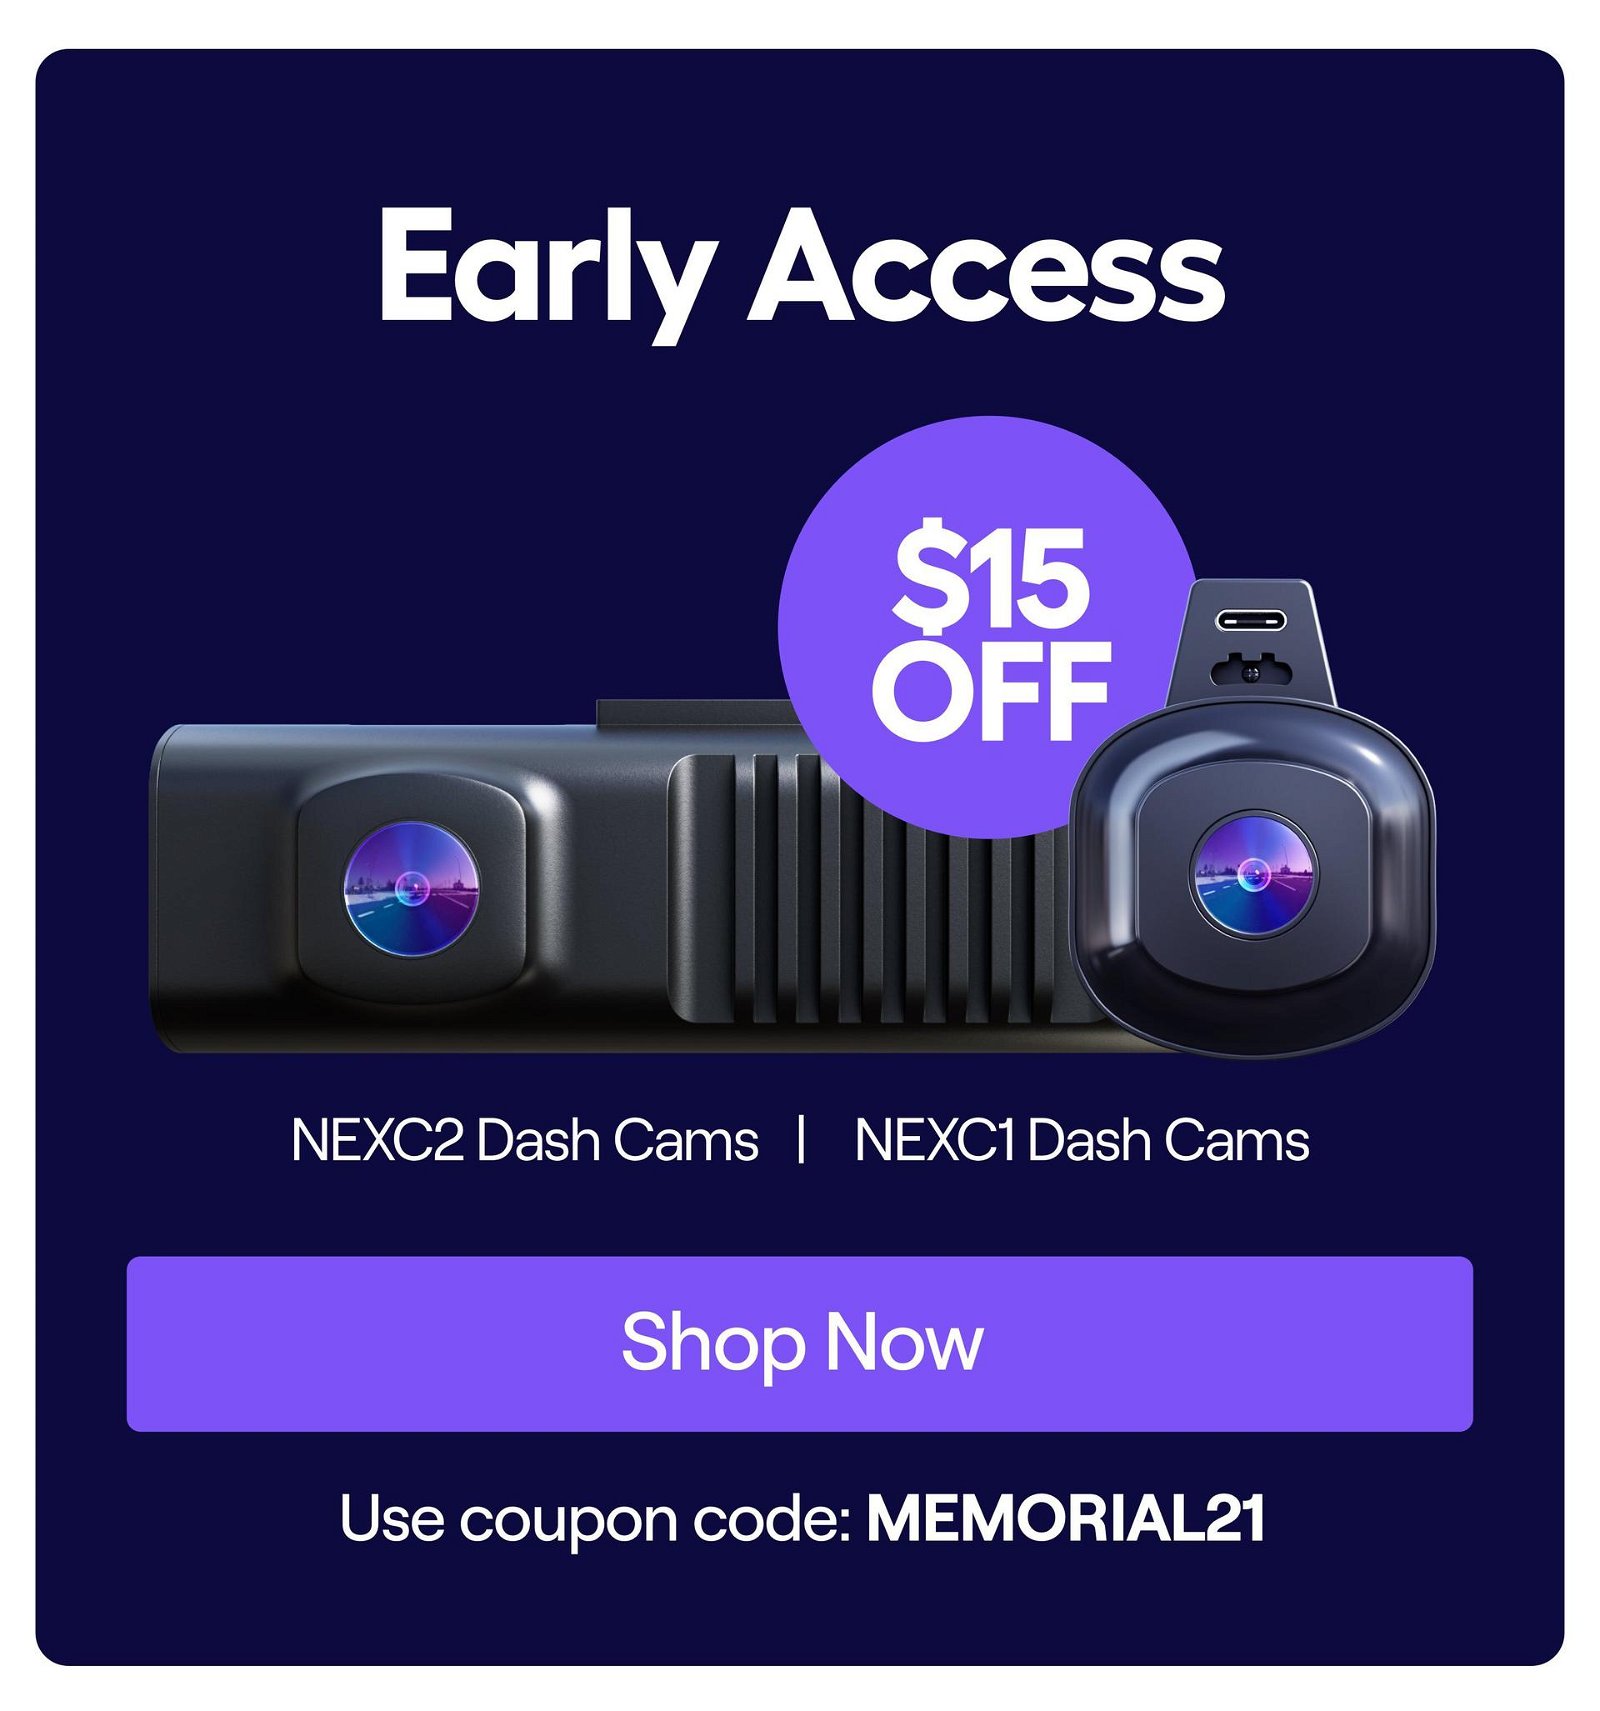 ONLY 48 HOURS LEFT TO SAVE $100 ON NEXAR DASH CAMS! - Nexar